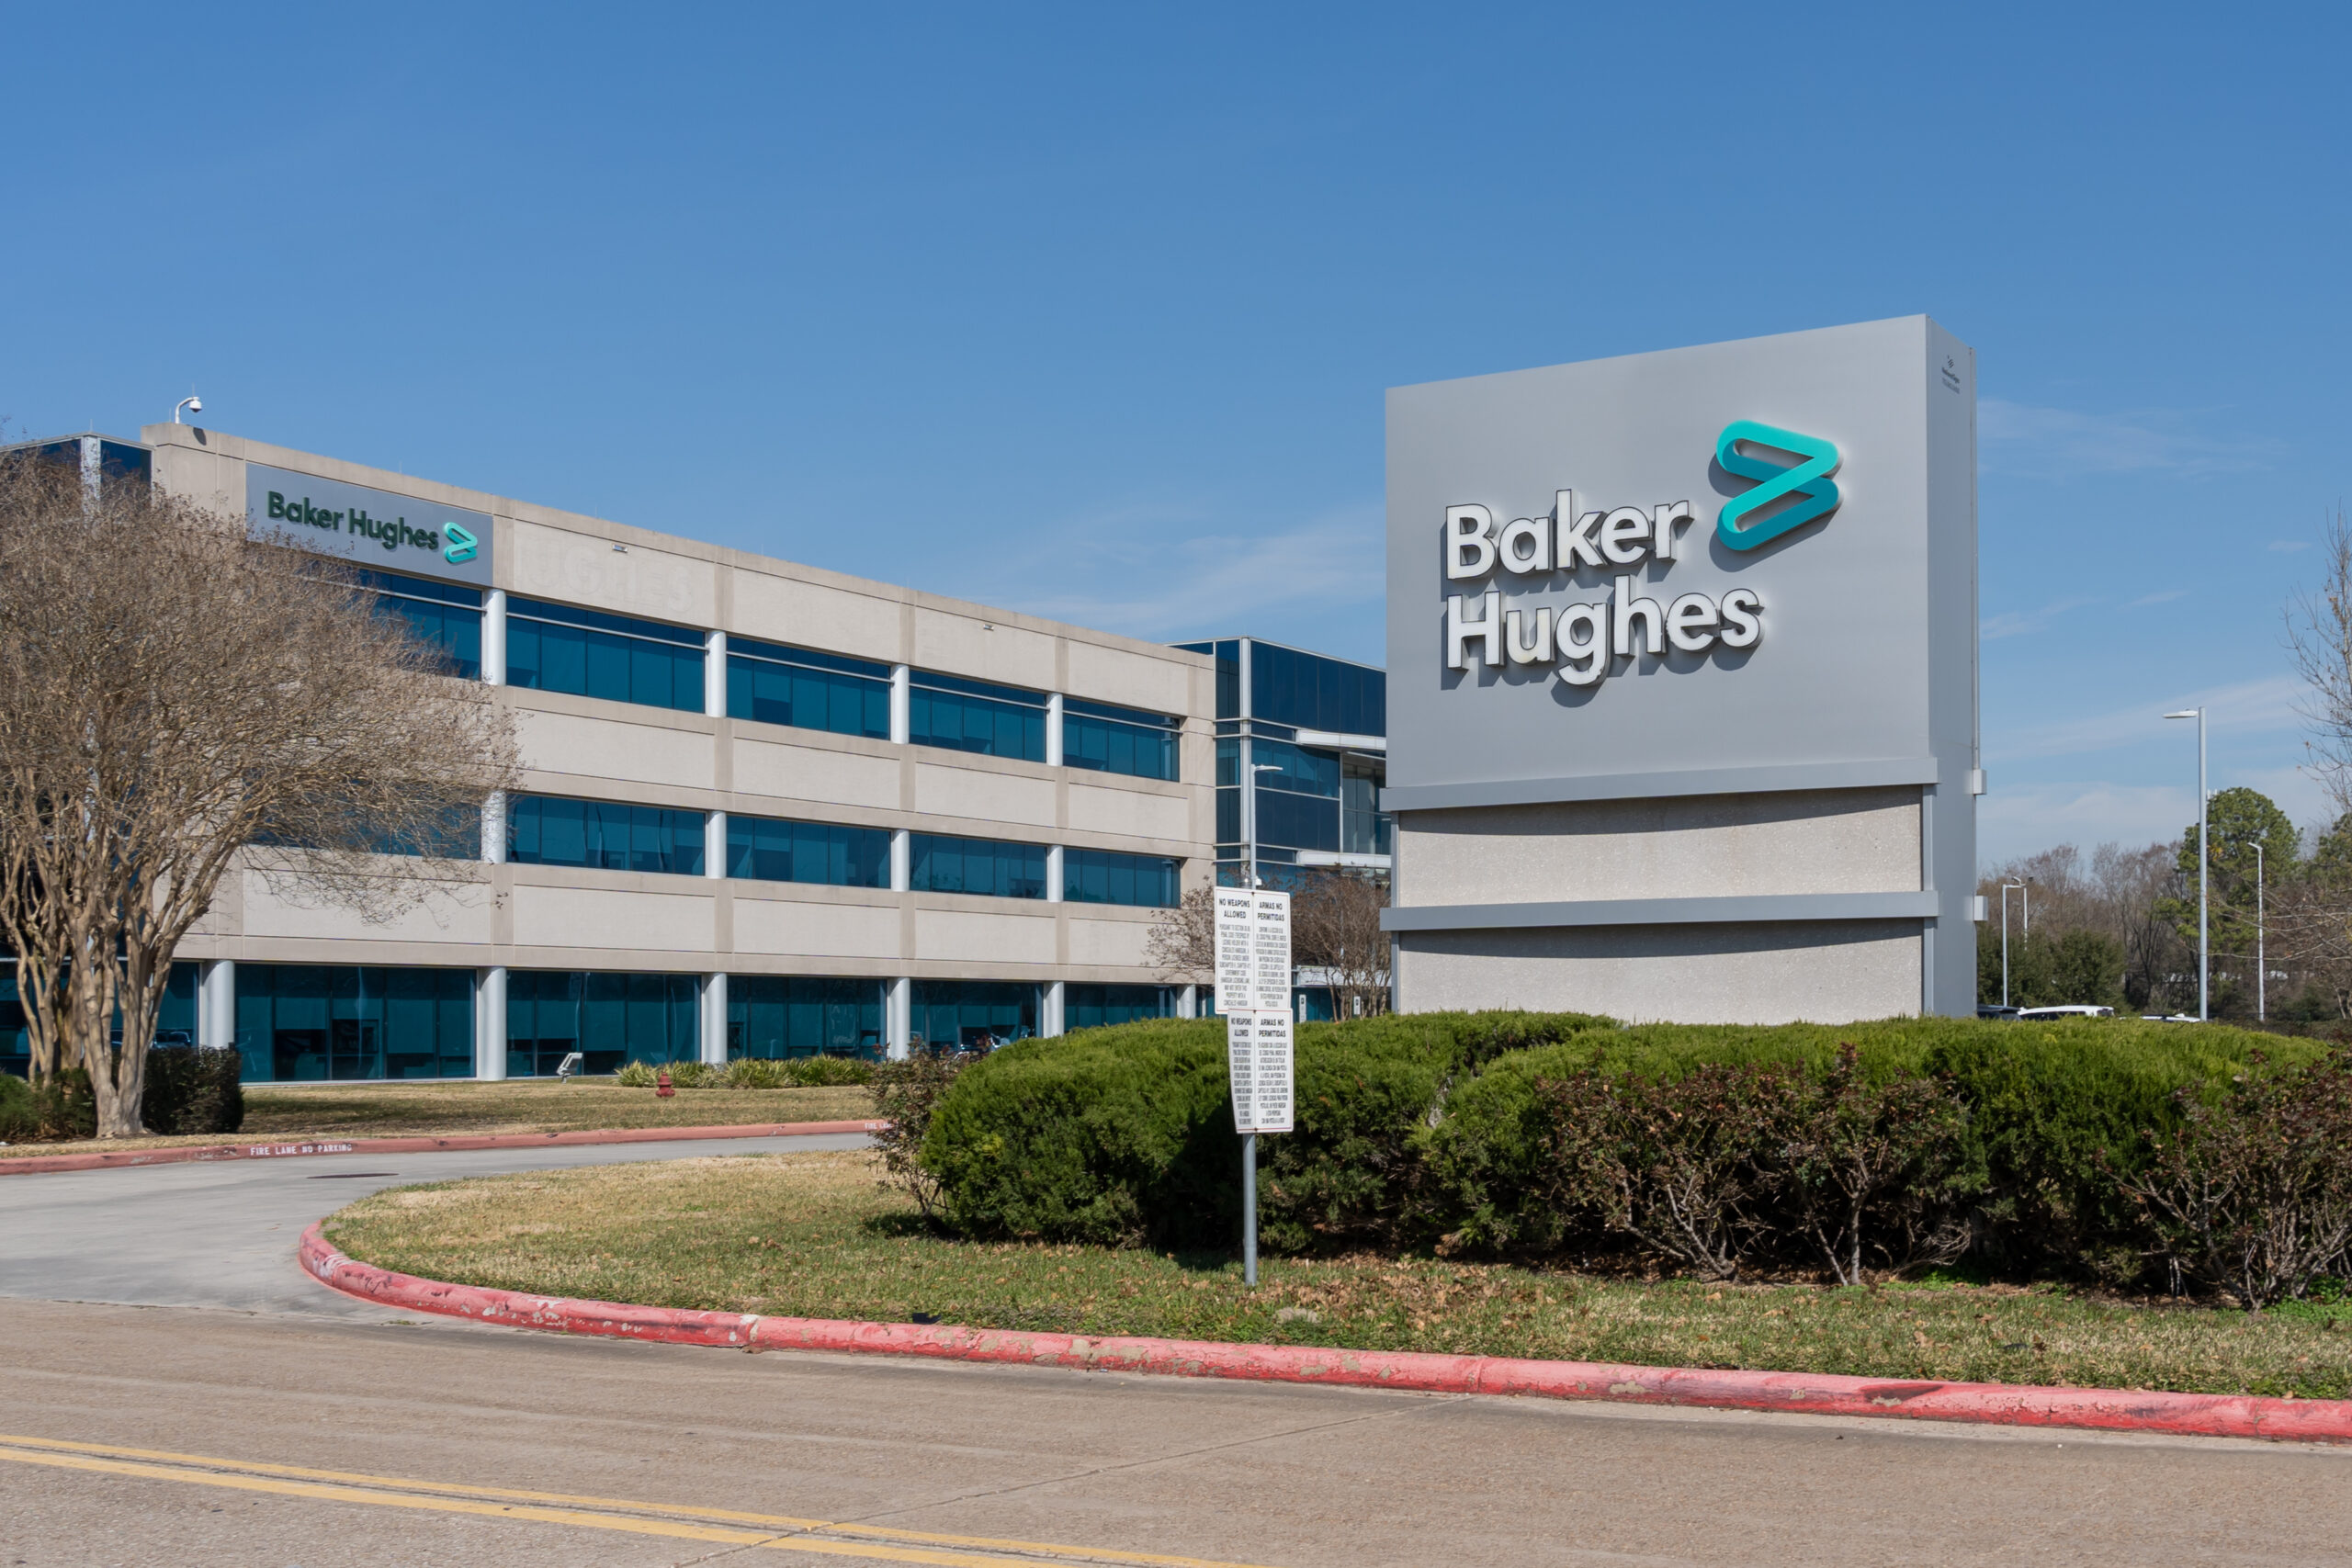 Baker Hughes, a new logistics hub in Crespina Lorenzana: agreement signed with the Region The agreement will address urban and landscape aspects. Giani: "We have asked the private entities involved to include a social clause in the tender to safeguard job continuity."